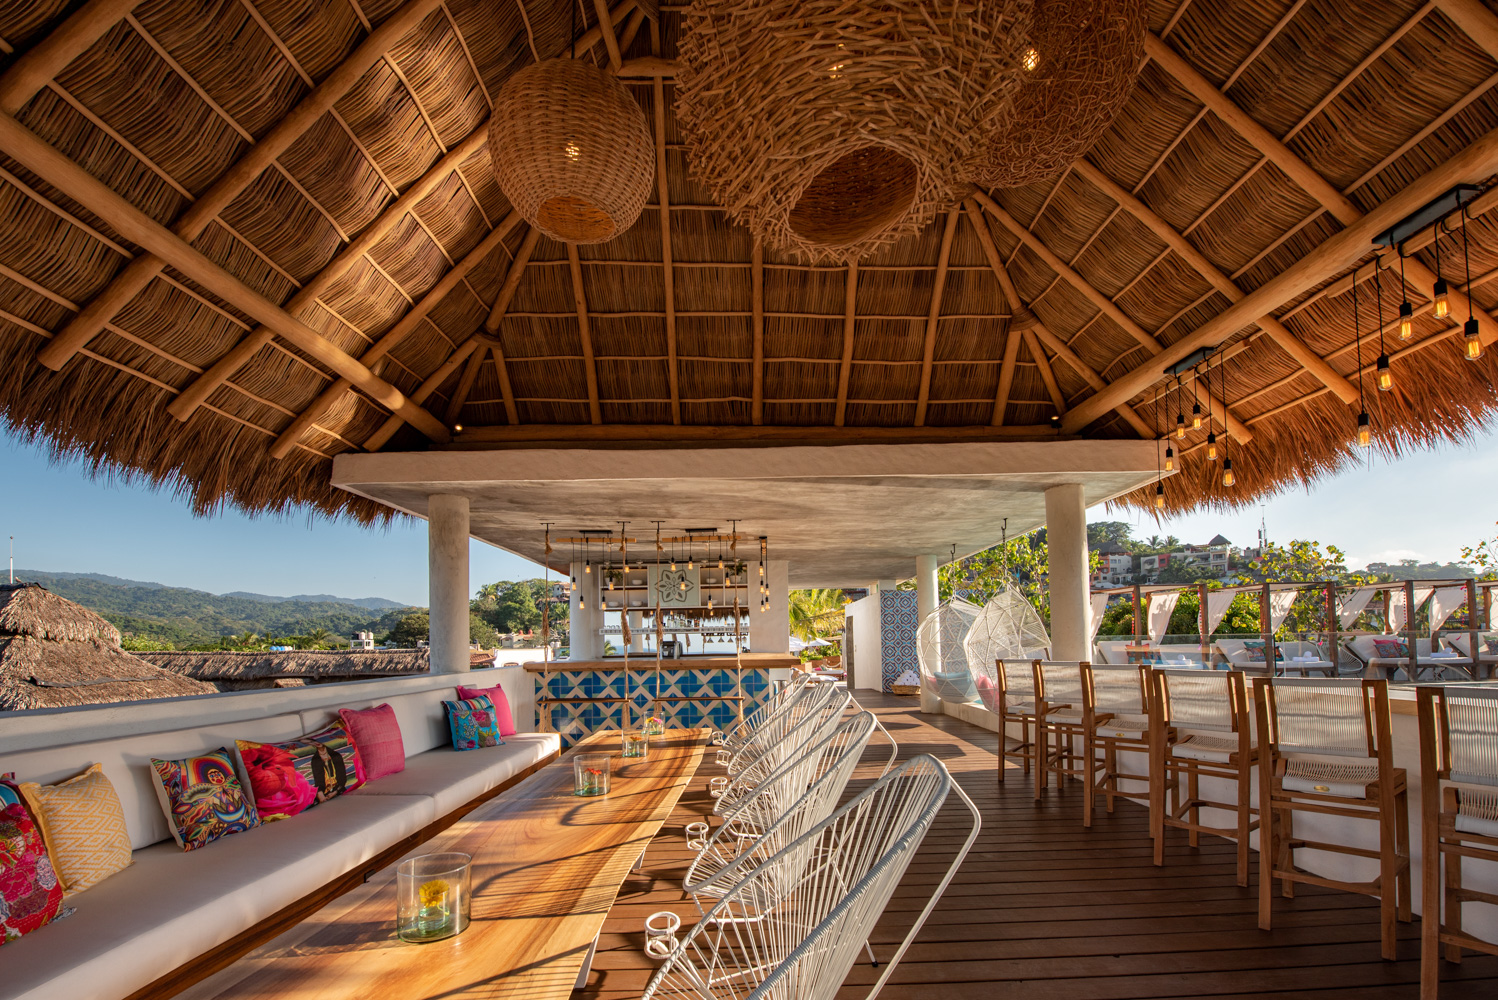 OUR ROOF BAR GIVE YOU THE BEST VIEW OF SAYULITA